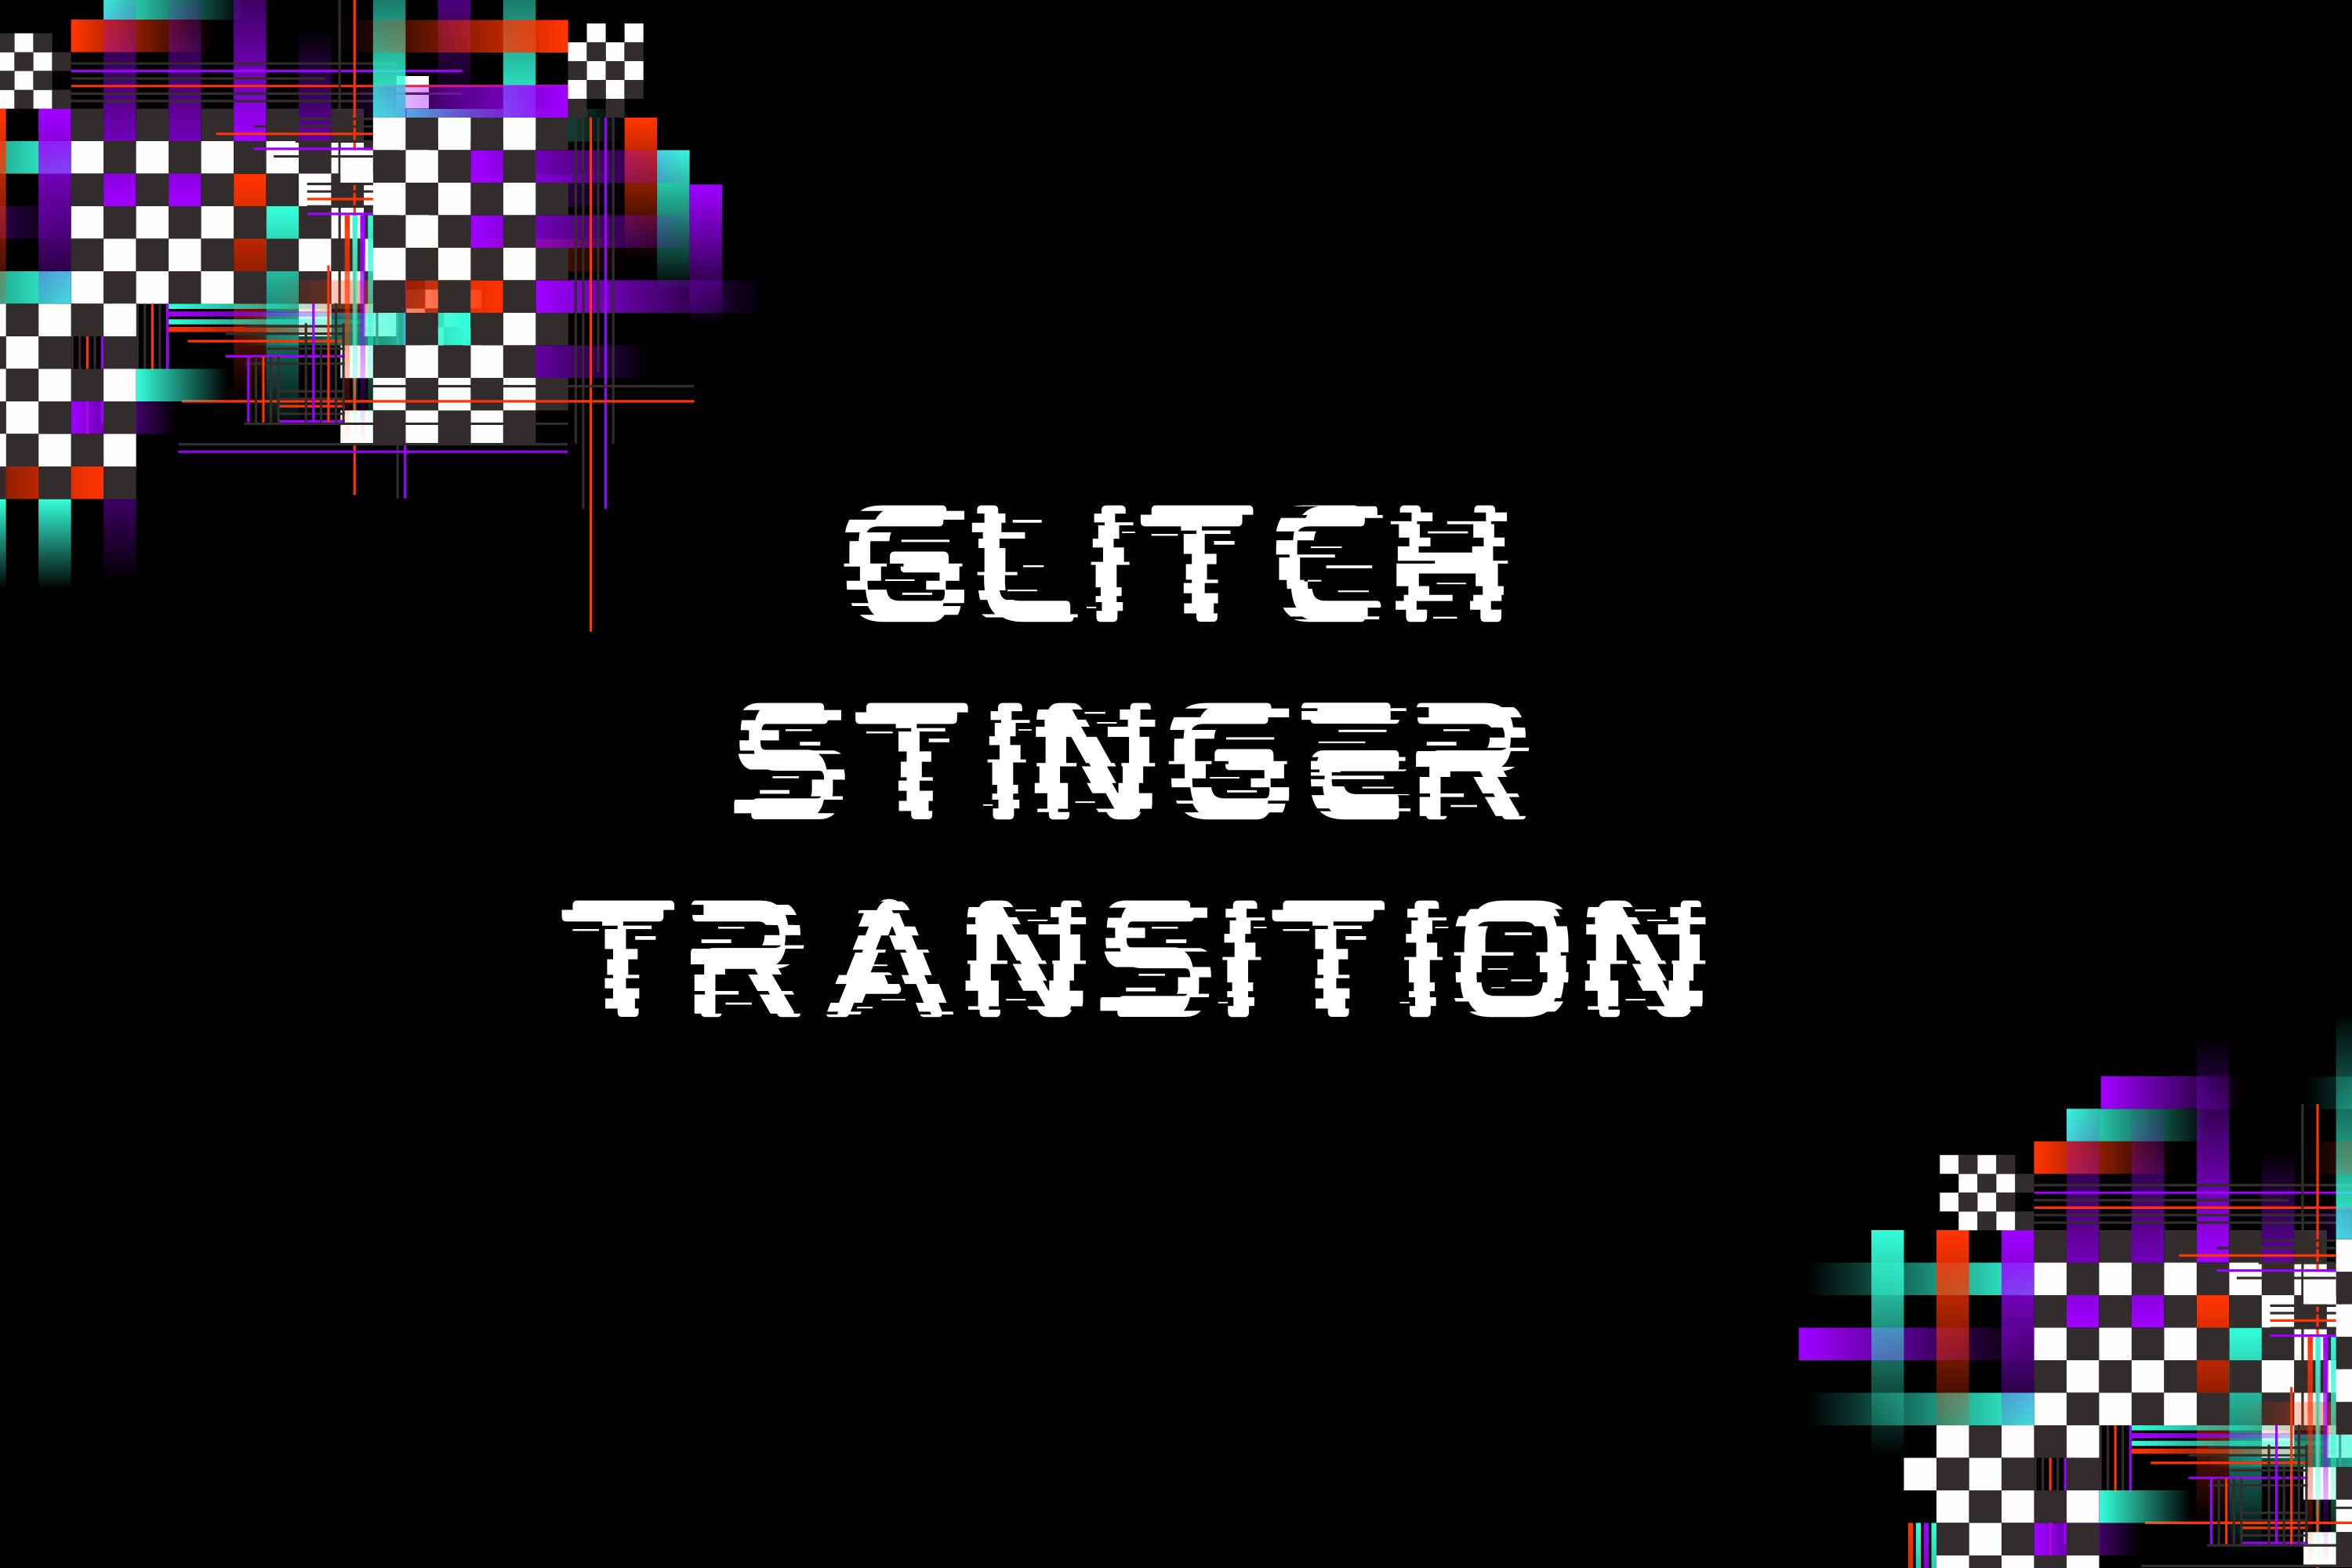 Glitch 3 Transitions for Live Streaming and Video Editing